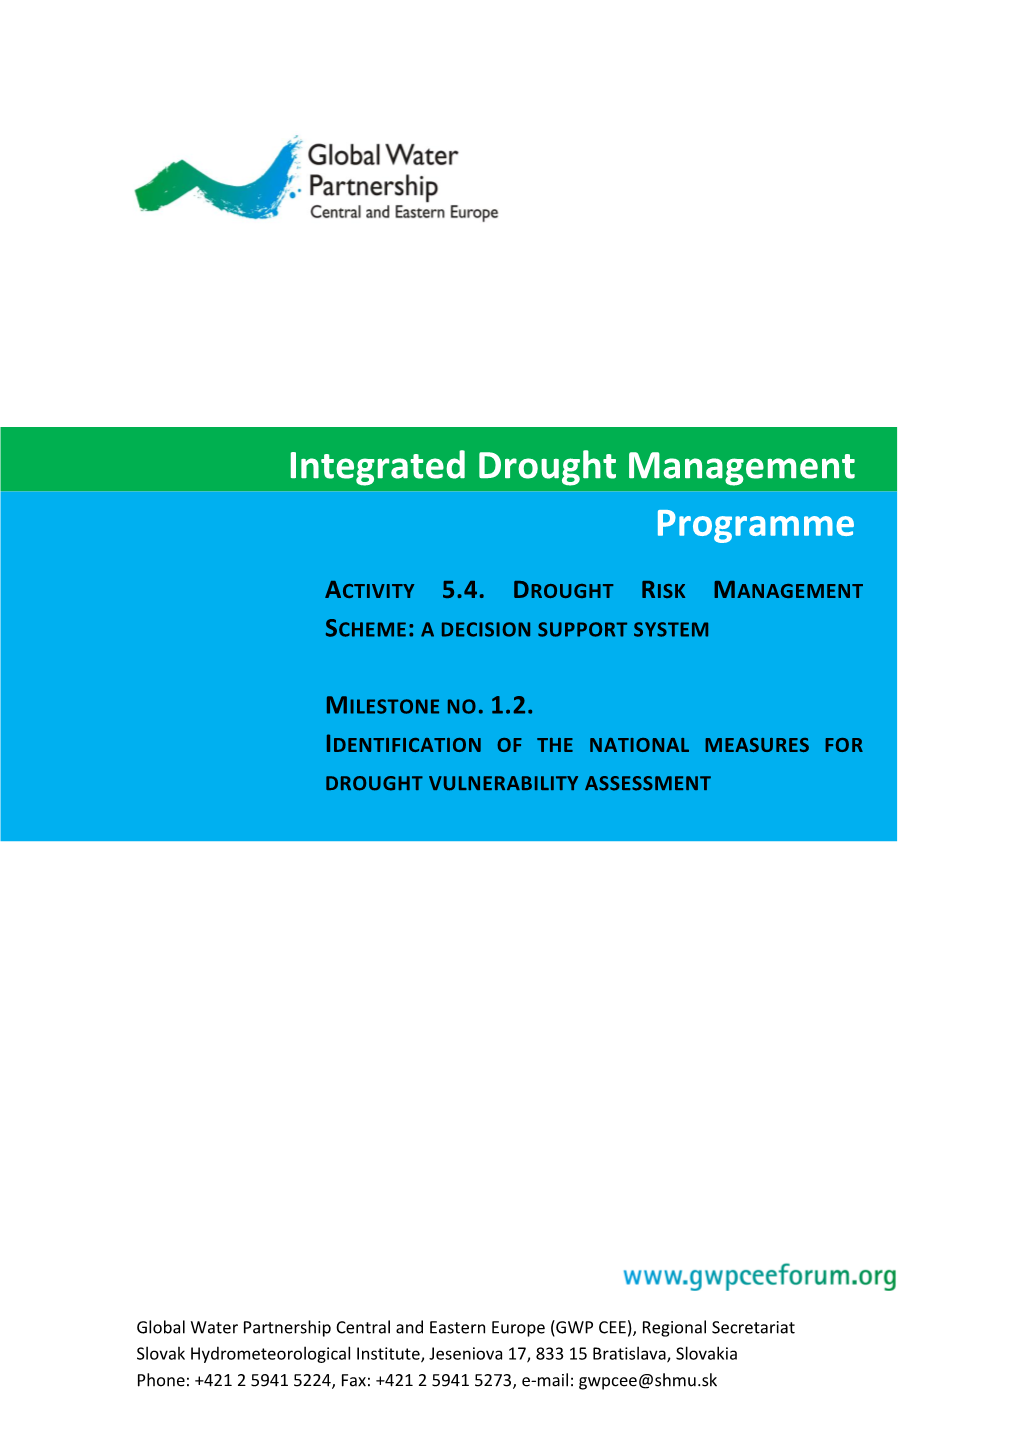 Vulnerability to Drought in Countries Involved in the Project Activity 5.4